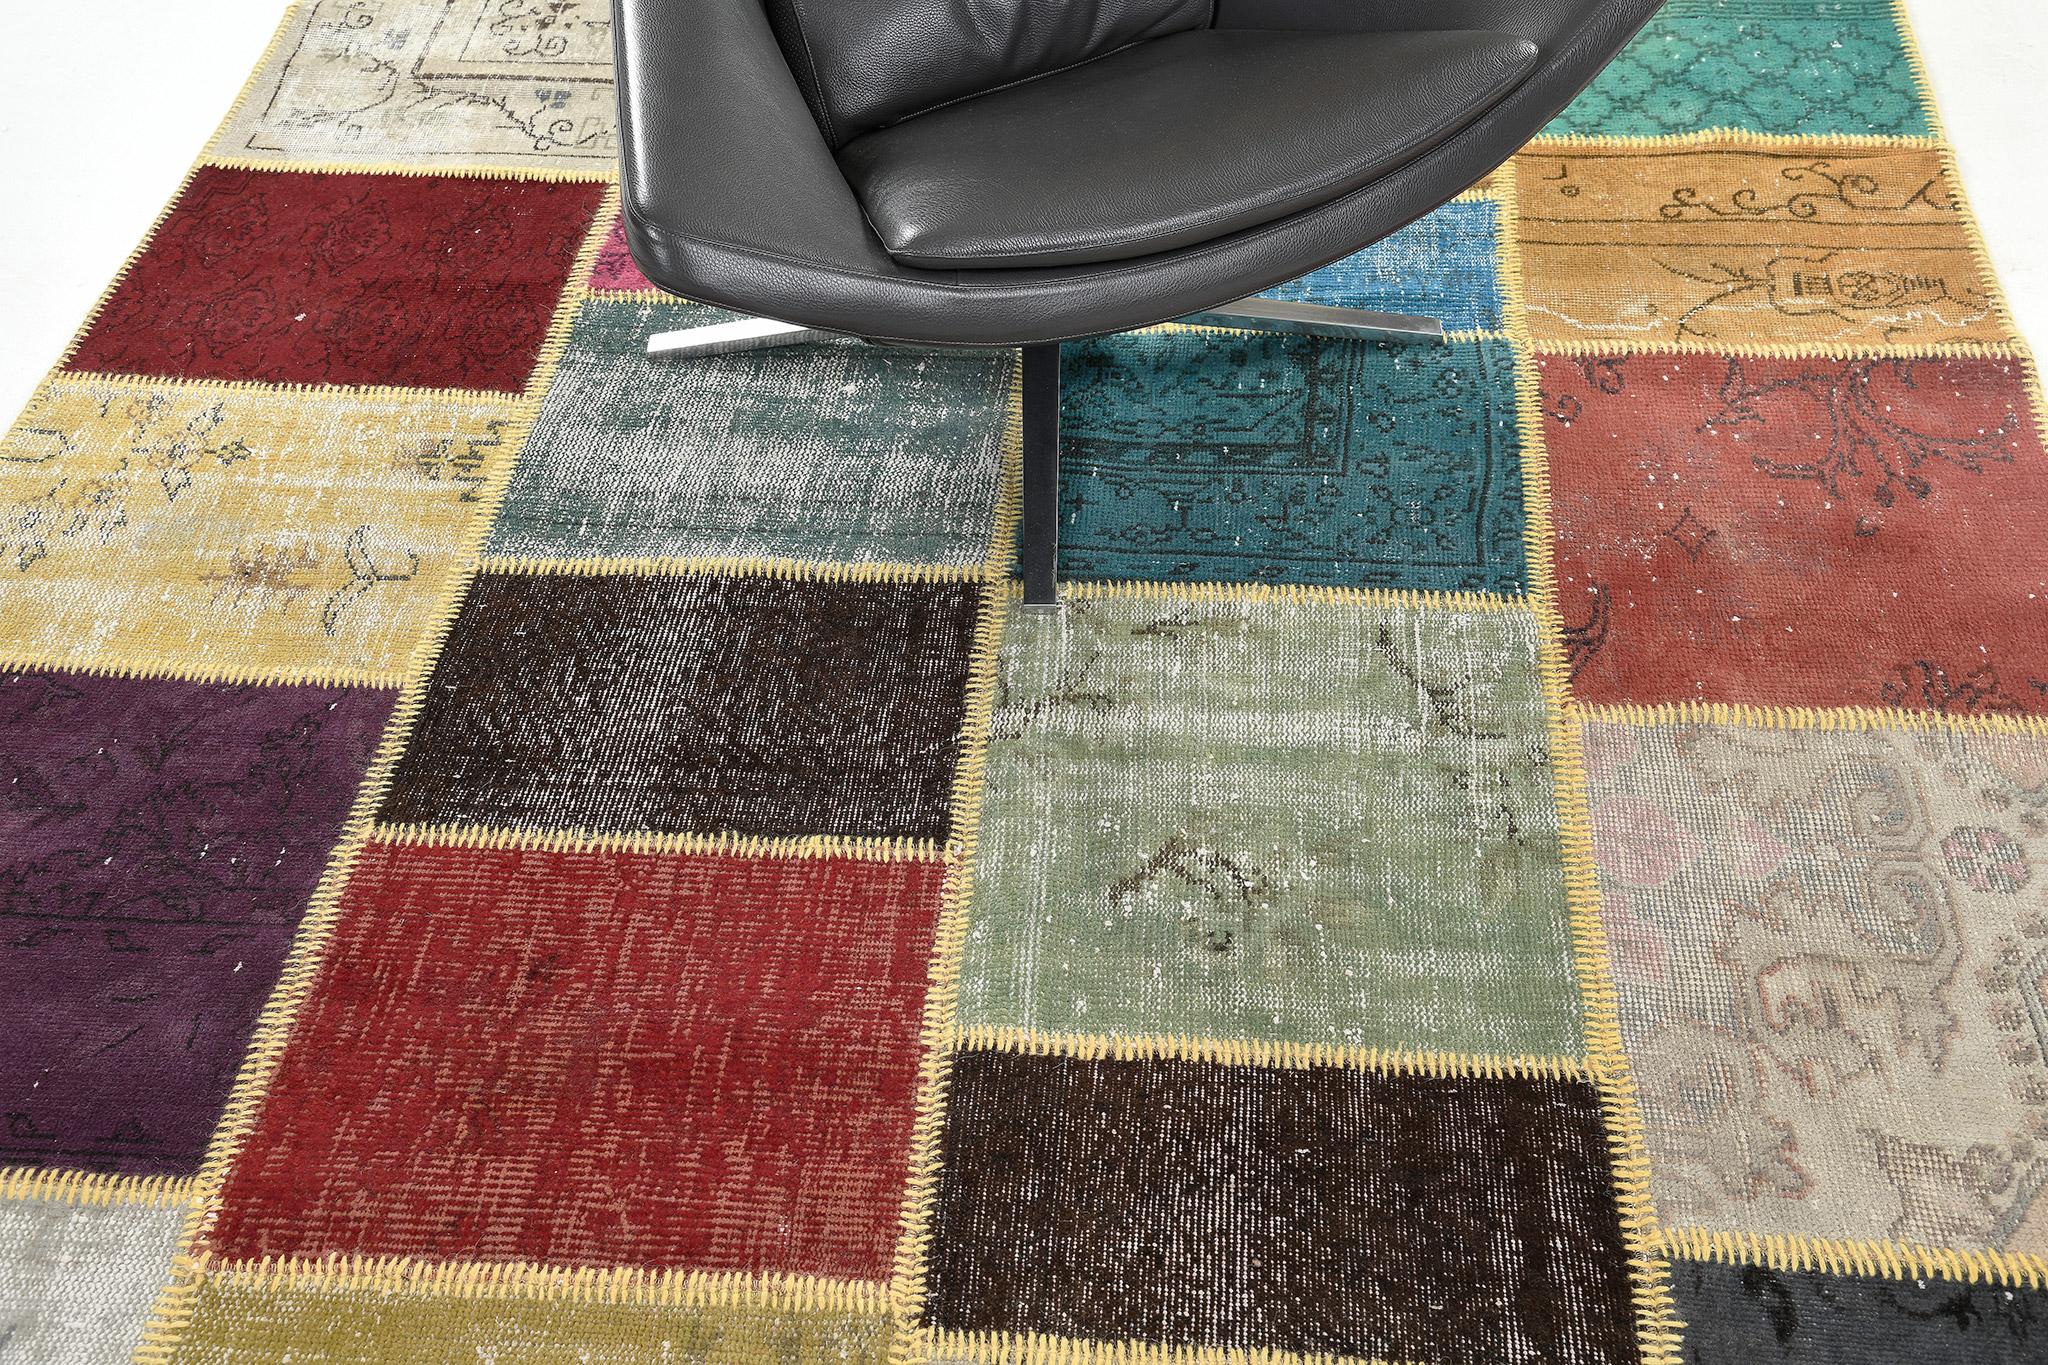 Displaying a charming and captivating appearance, this Vintage Turkish Patchwork kilim is an embodiment of modern rustic preppy style. The patchwork pattern is composed of intricately designed variegated irregular squares and rectangles. With its